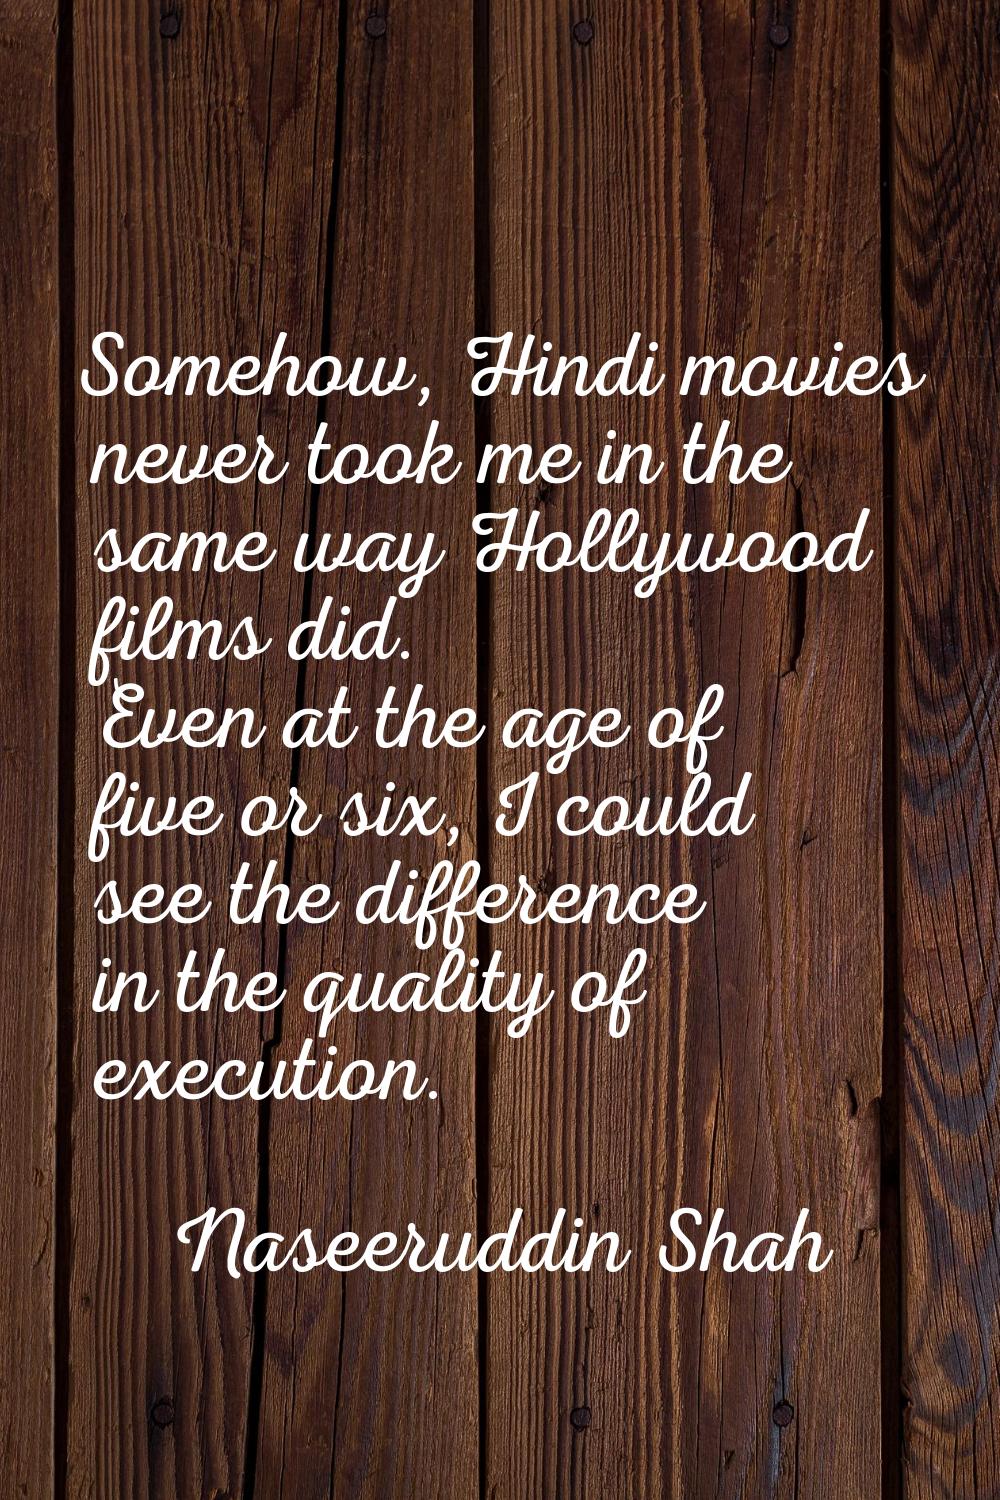 Somehow, Hindi movies never took me in the same way Hollywood films did. Even at the age of five or